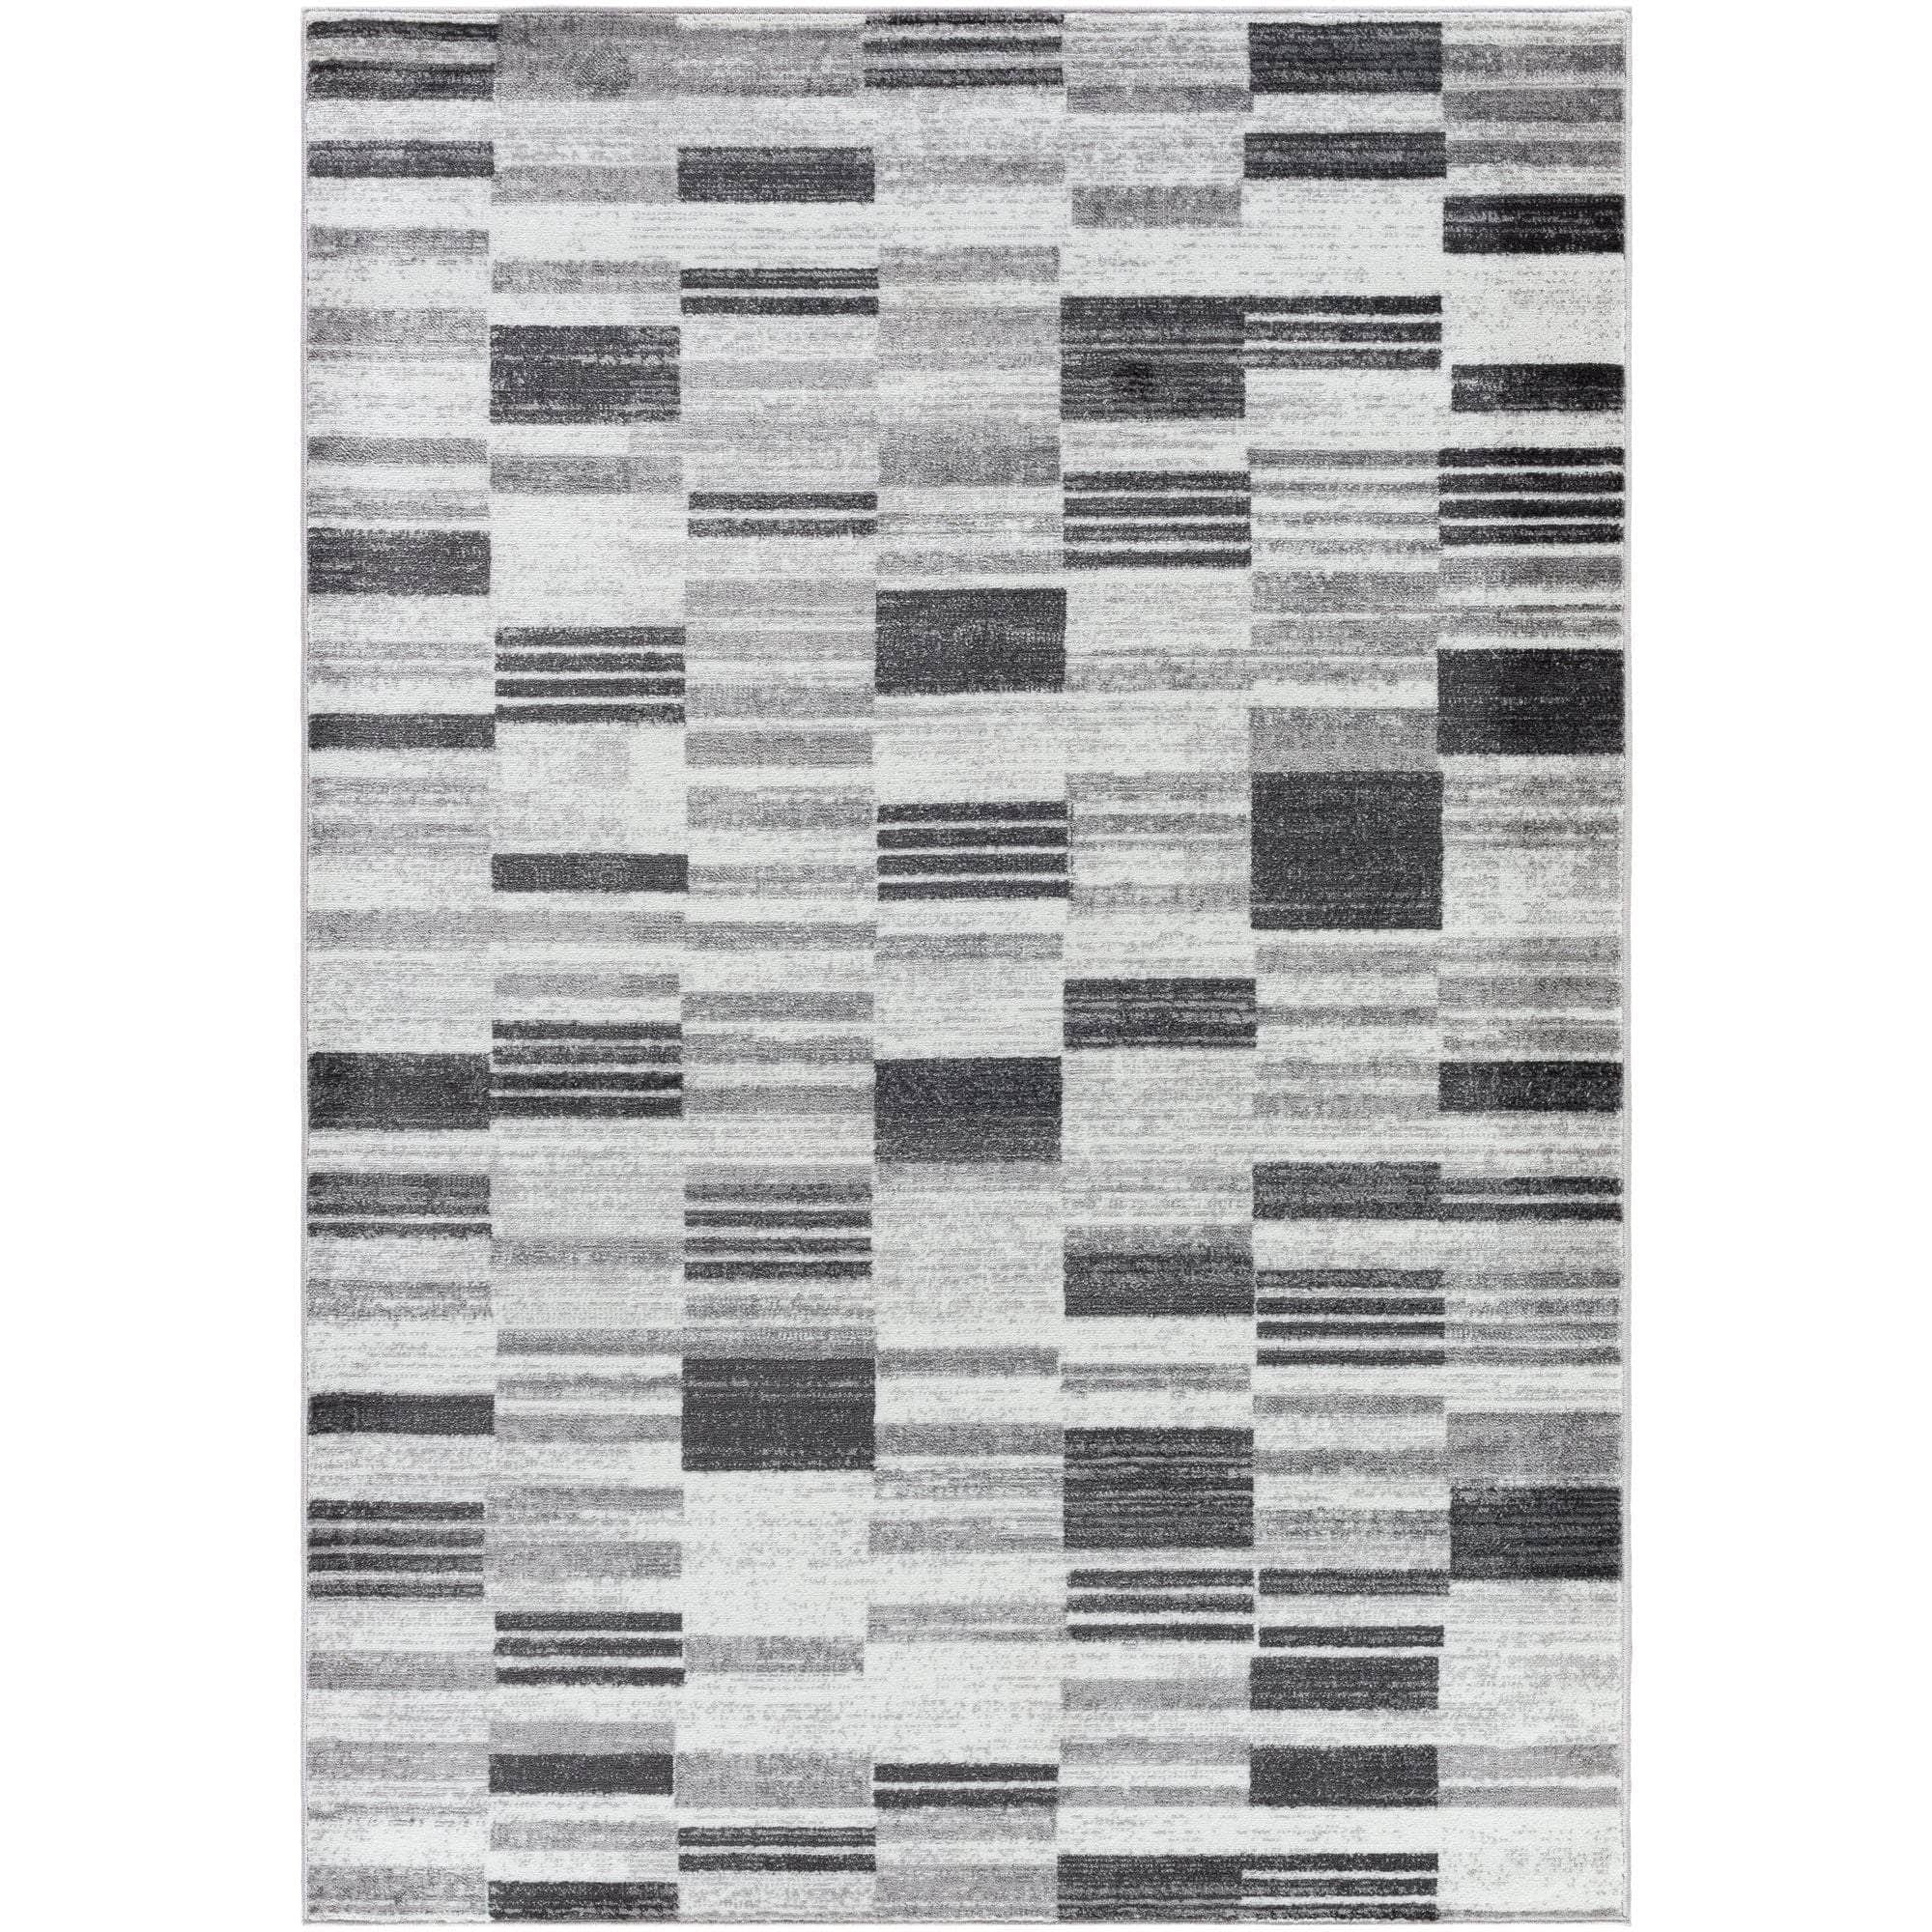 Machine Woven MNC-2360 Light Silver, Slate, Metallic - Silver, Charcoal, Sage, Ink Rugs #color_light silver, slate, metallic - silver, charcoal, sage, ink